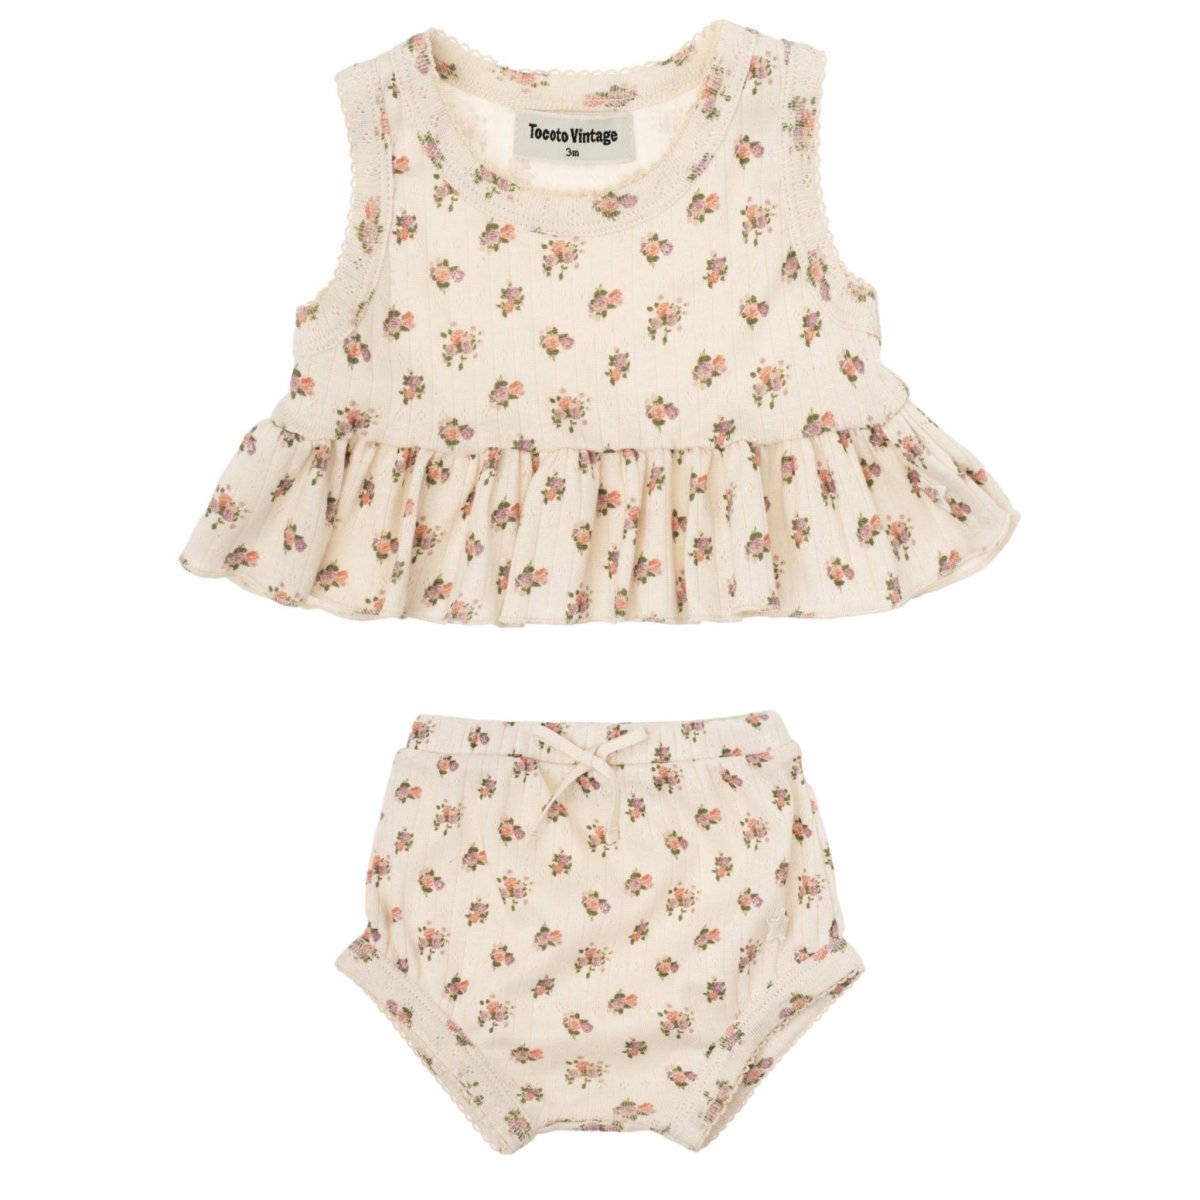 FLOWER PRINT OPEN BACK TOP AND BLOOMERS SET - SET